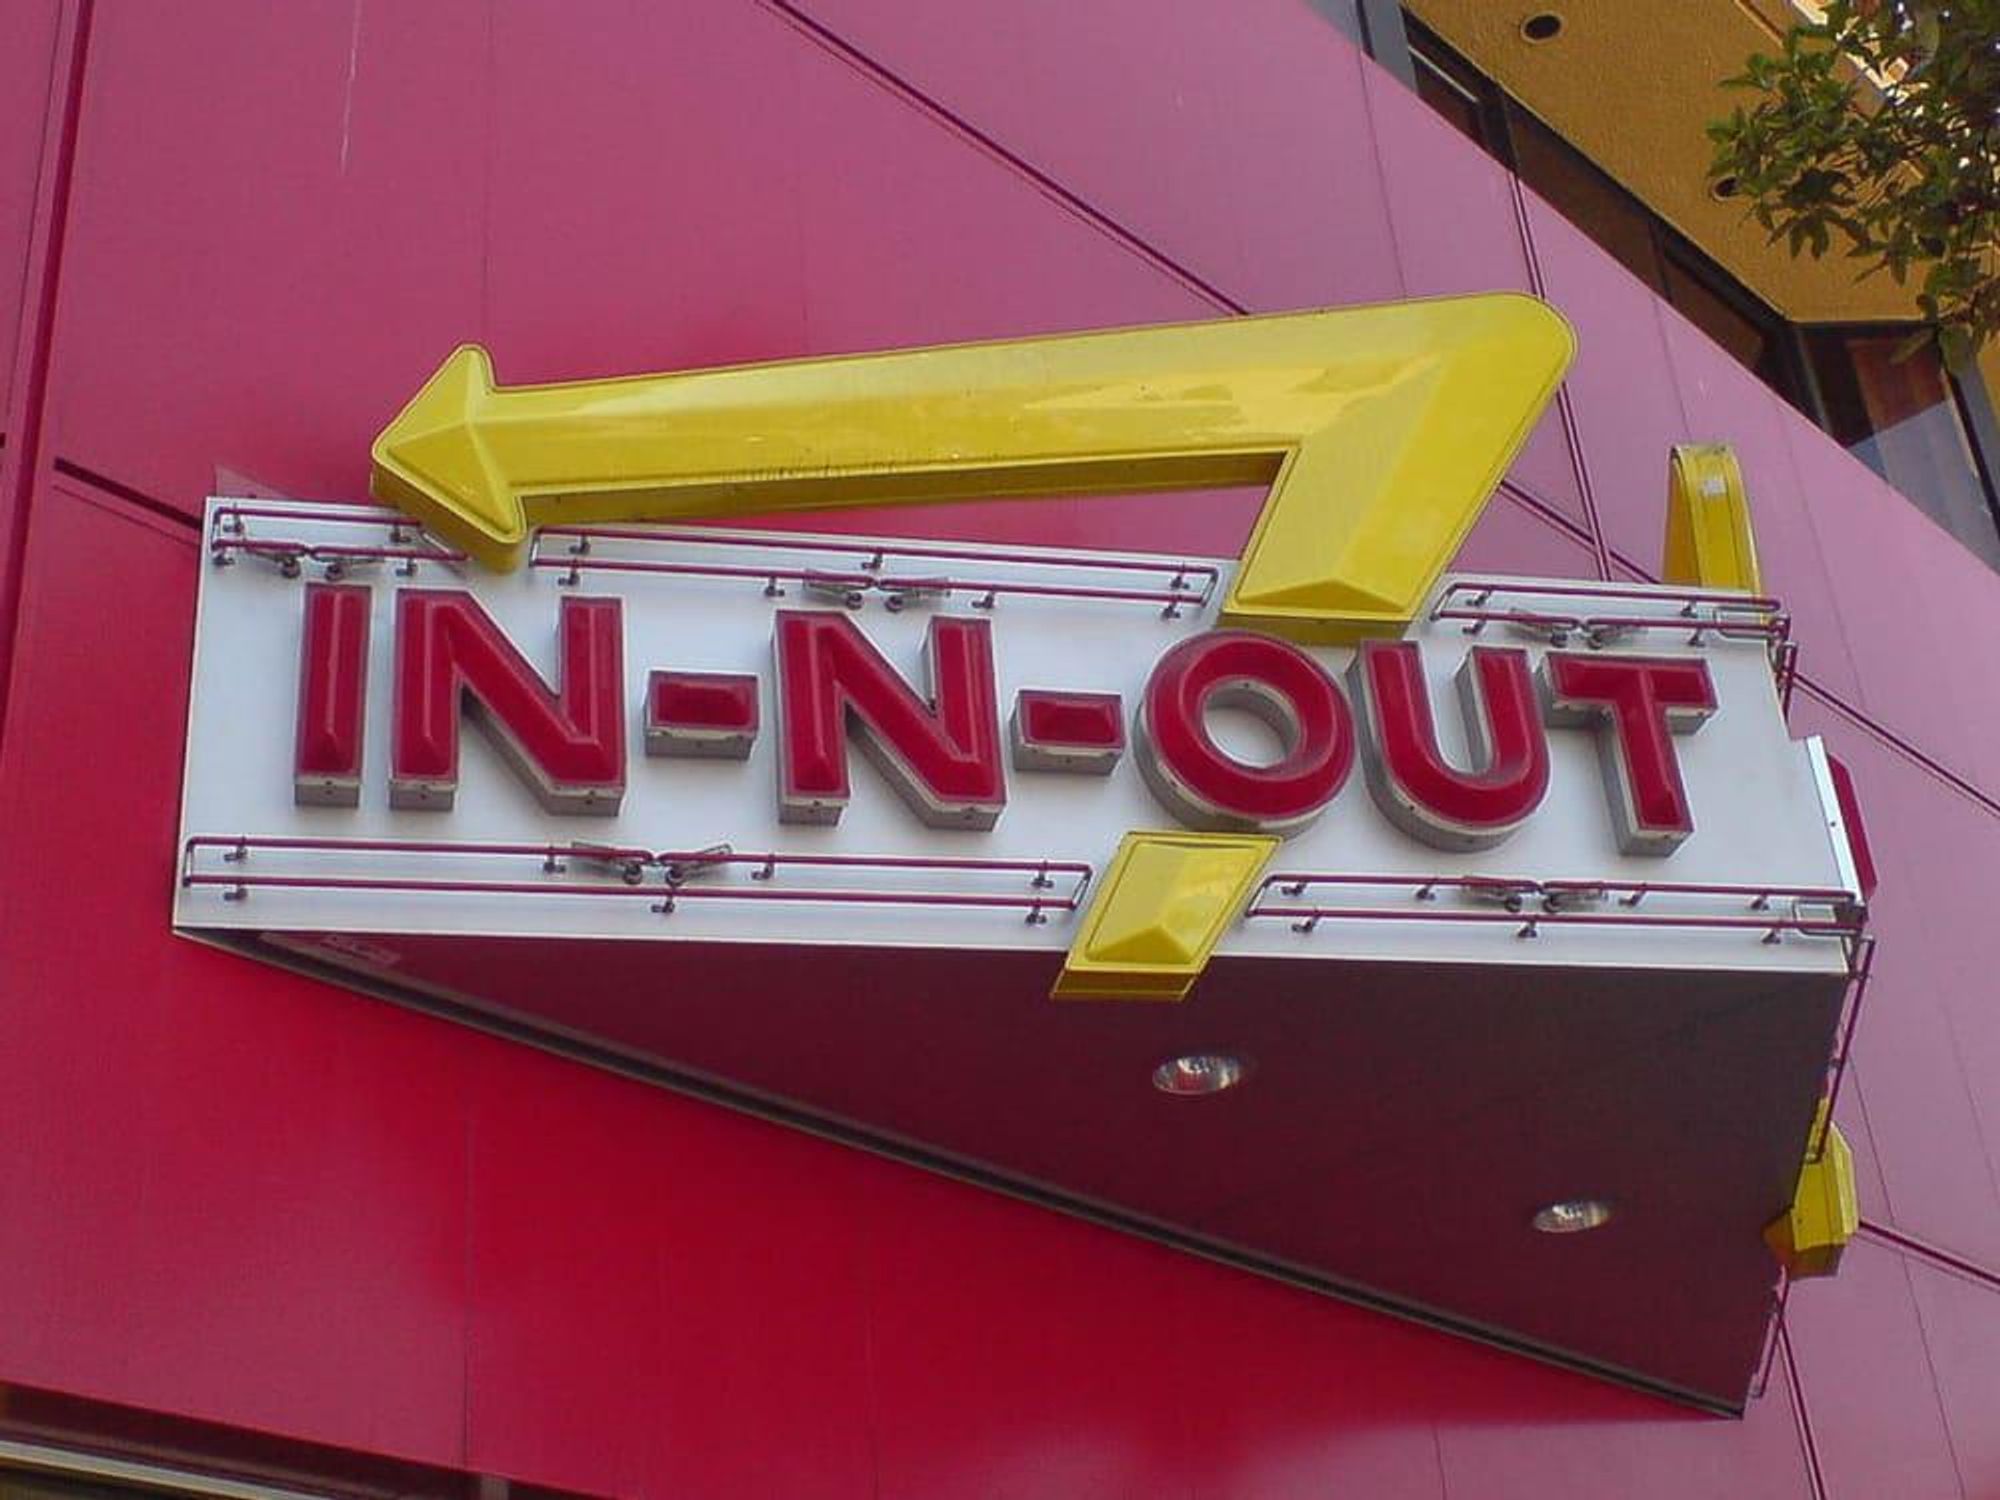 In-N-Out, neon sign, hamburgers, burgers